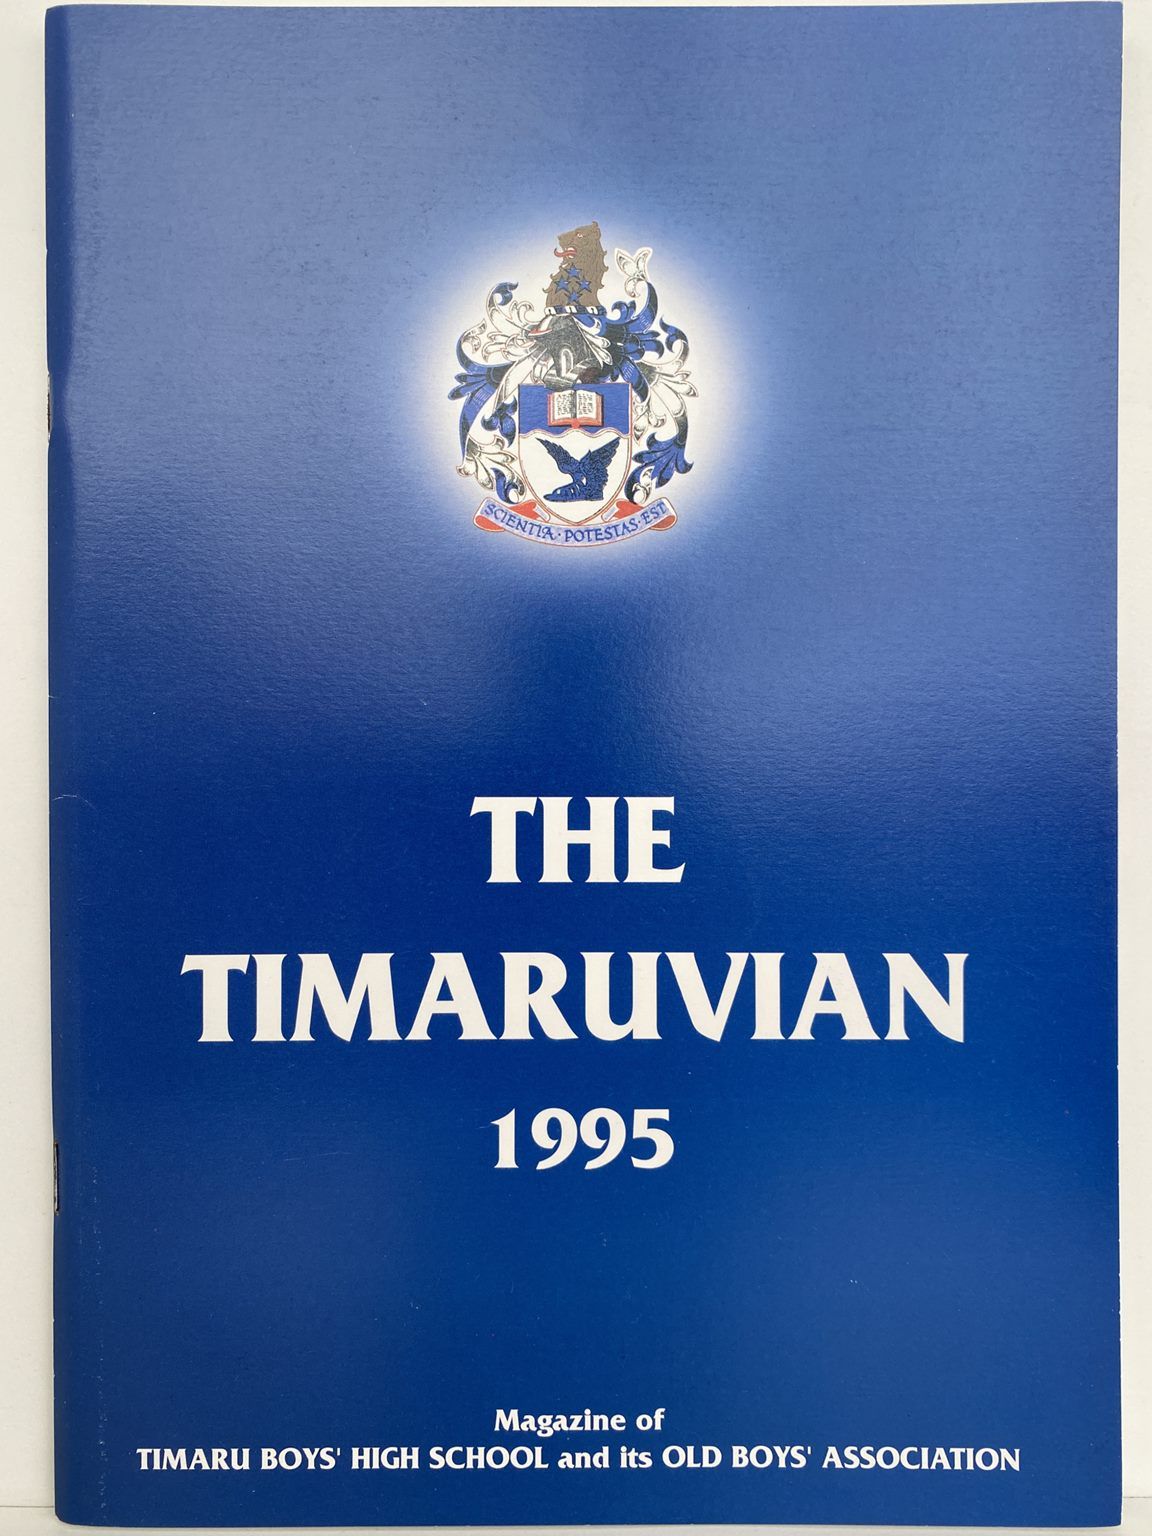 THE TIMARUVIAN: Magazine of the Timaru Boys' High School and its Old Boys' Association 1995